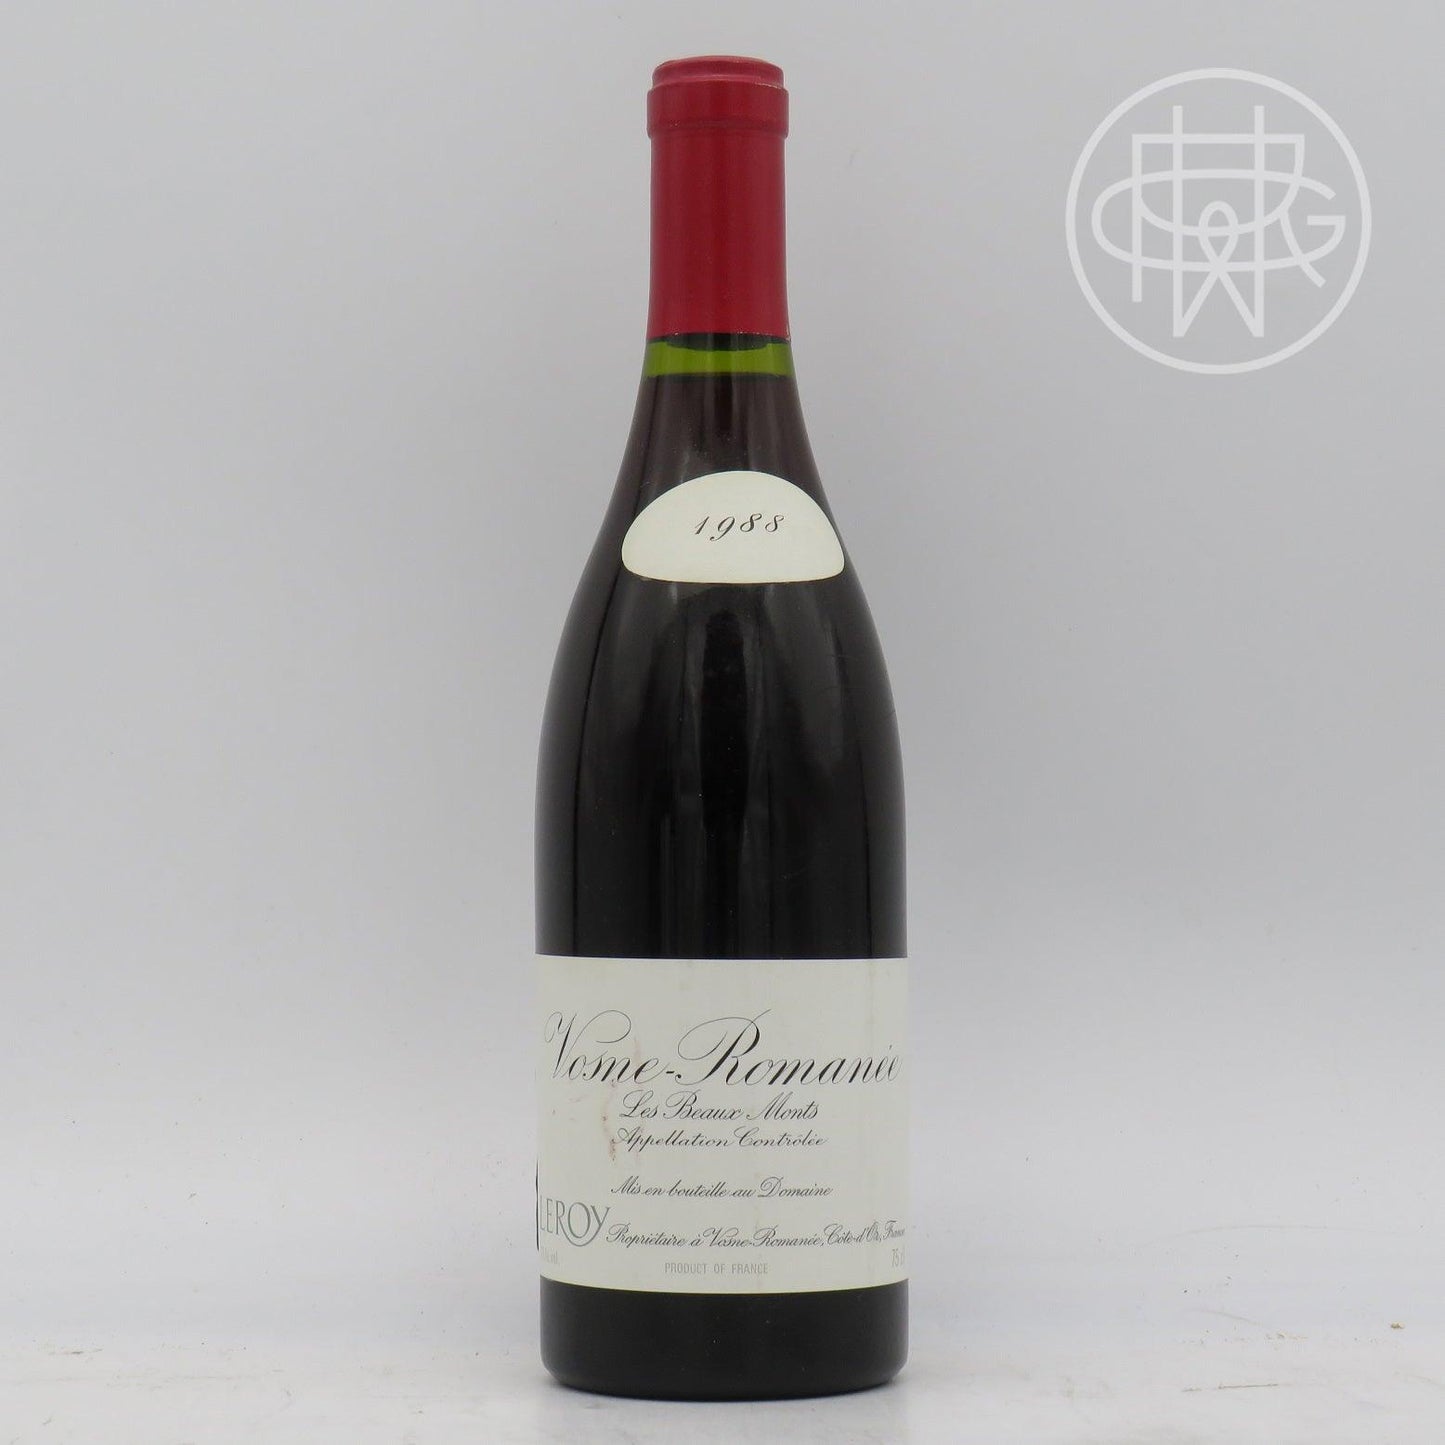 Leroy Beaux Monts 1988 750mL - GRW Wine Collection